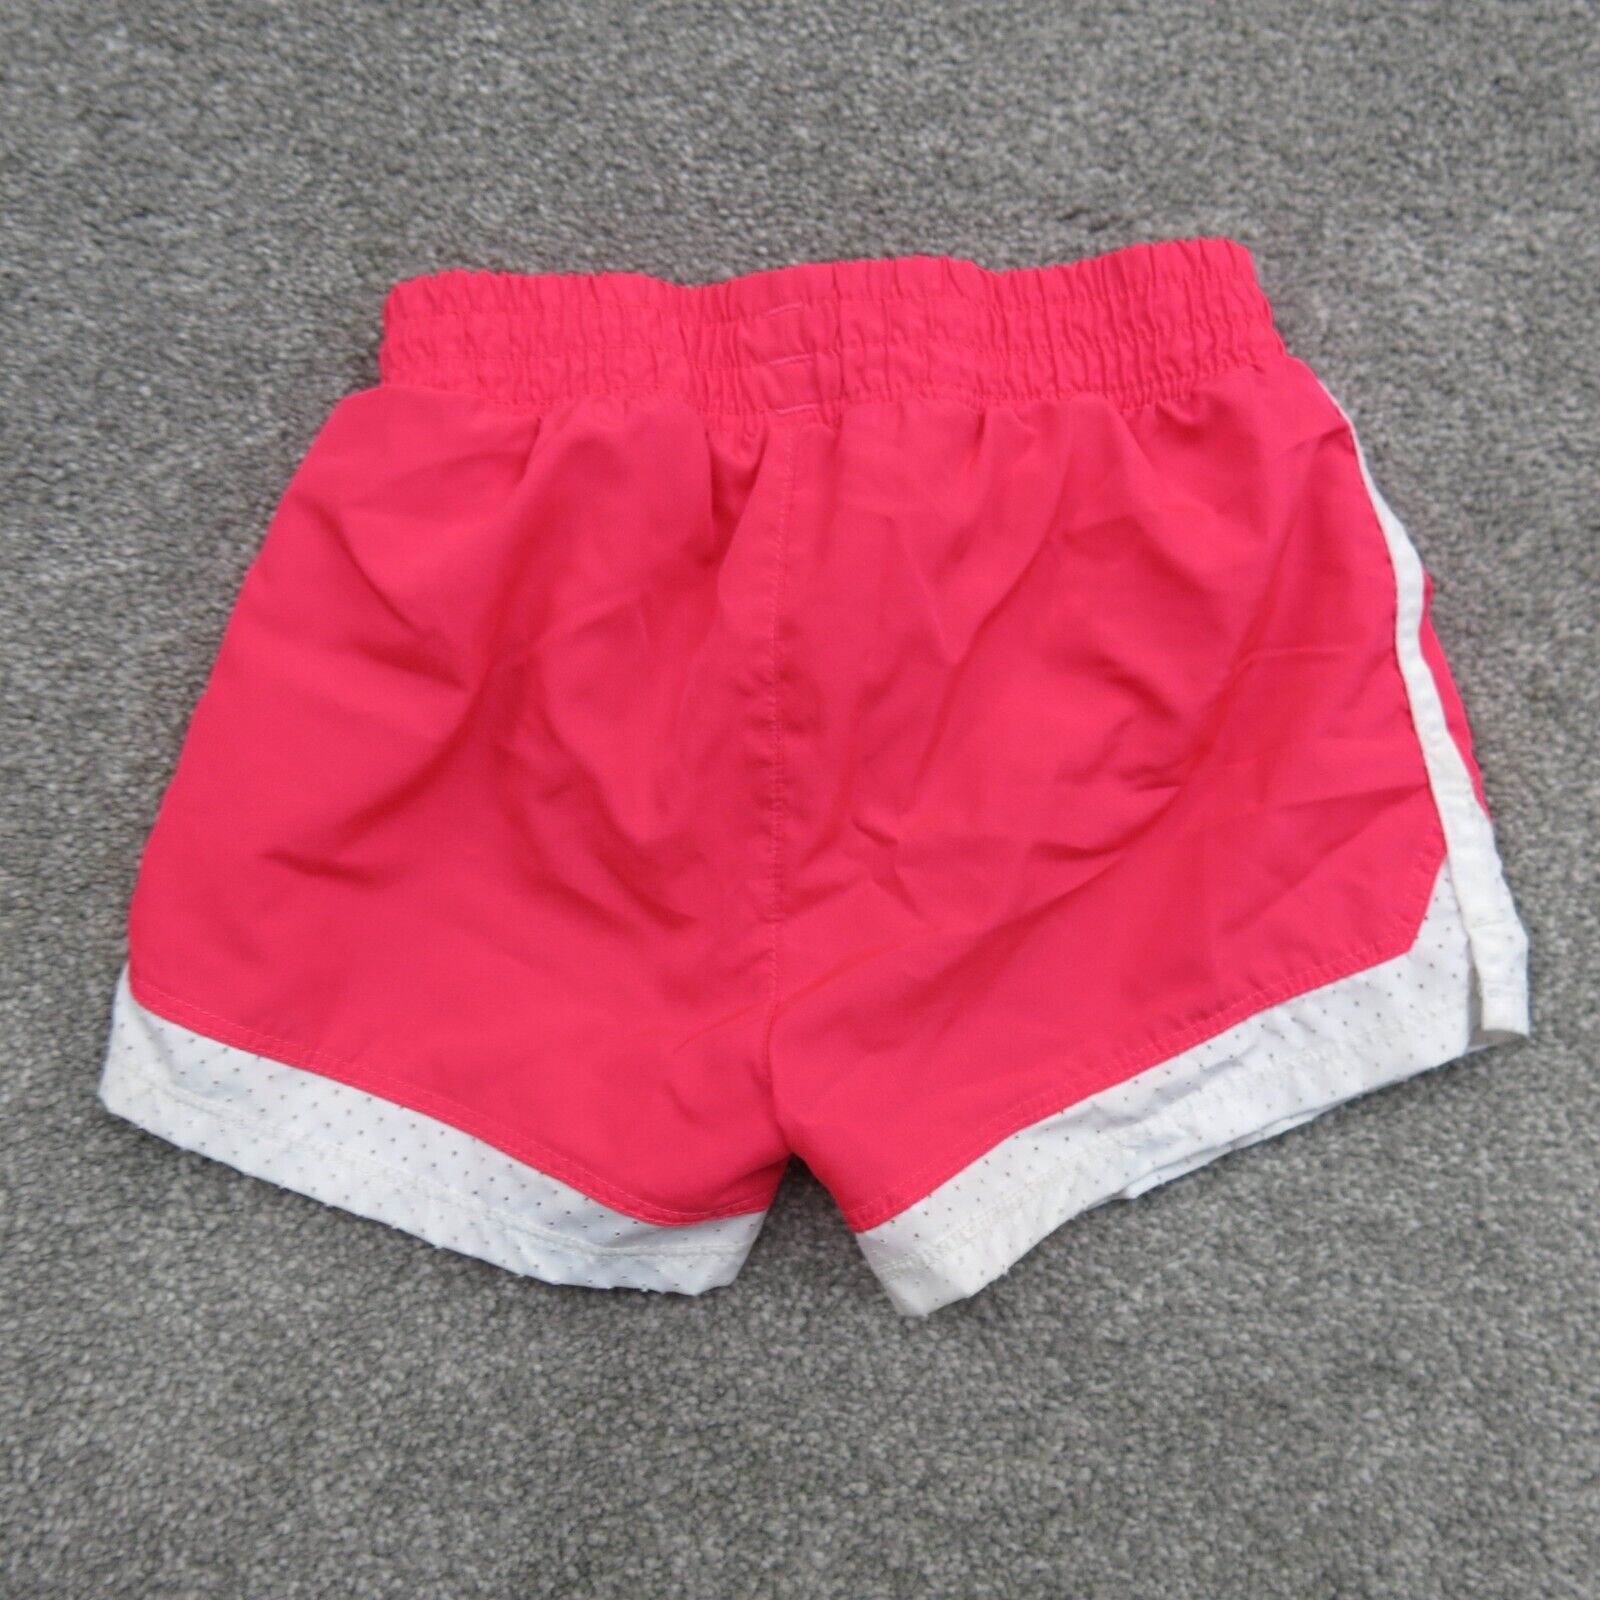 Under Armour Shorts Girls Size 4T Pink Solid Running & Jogging